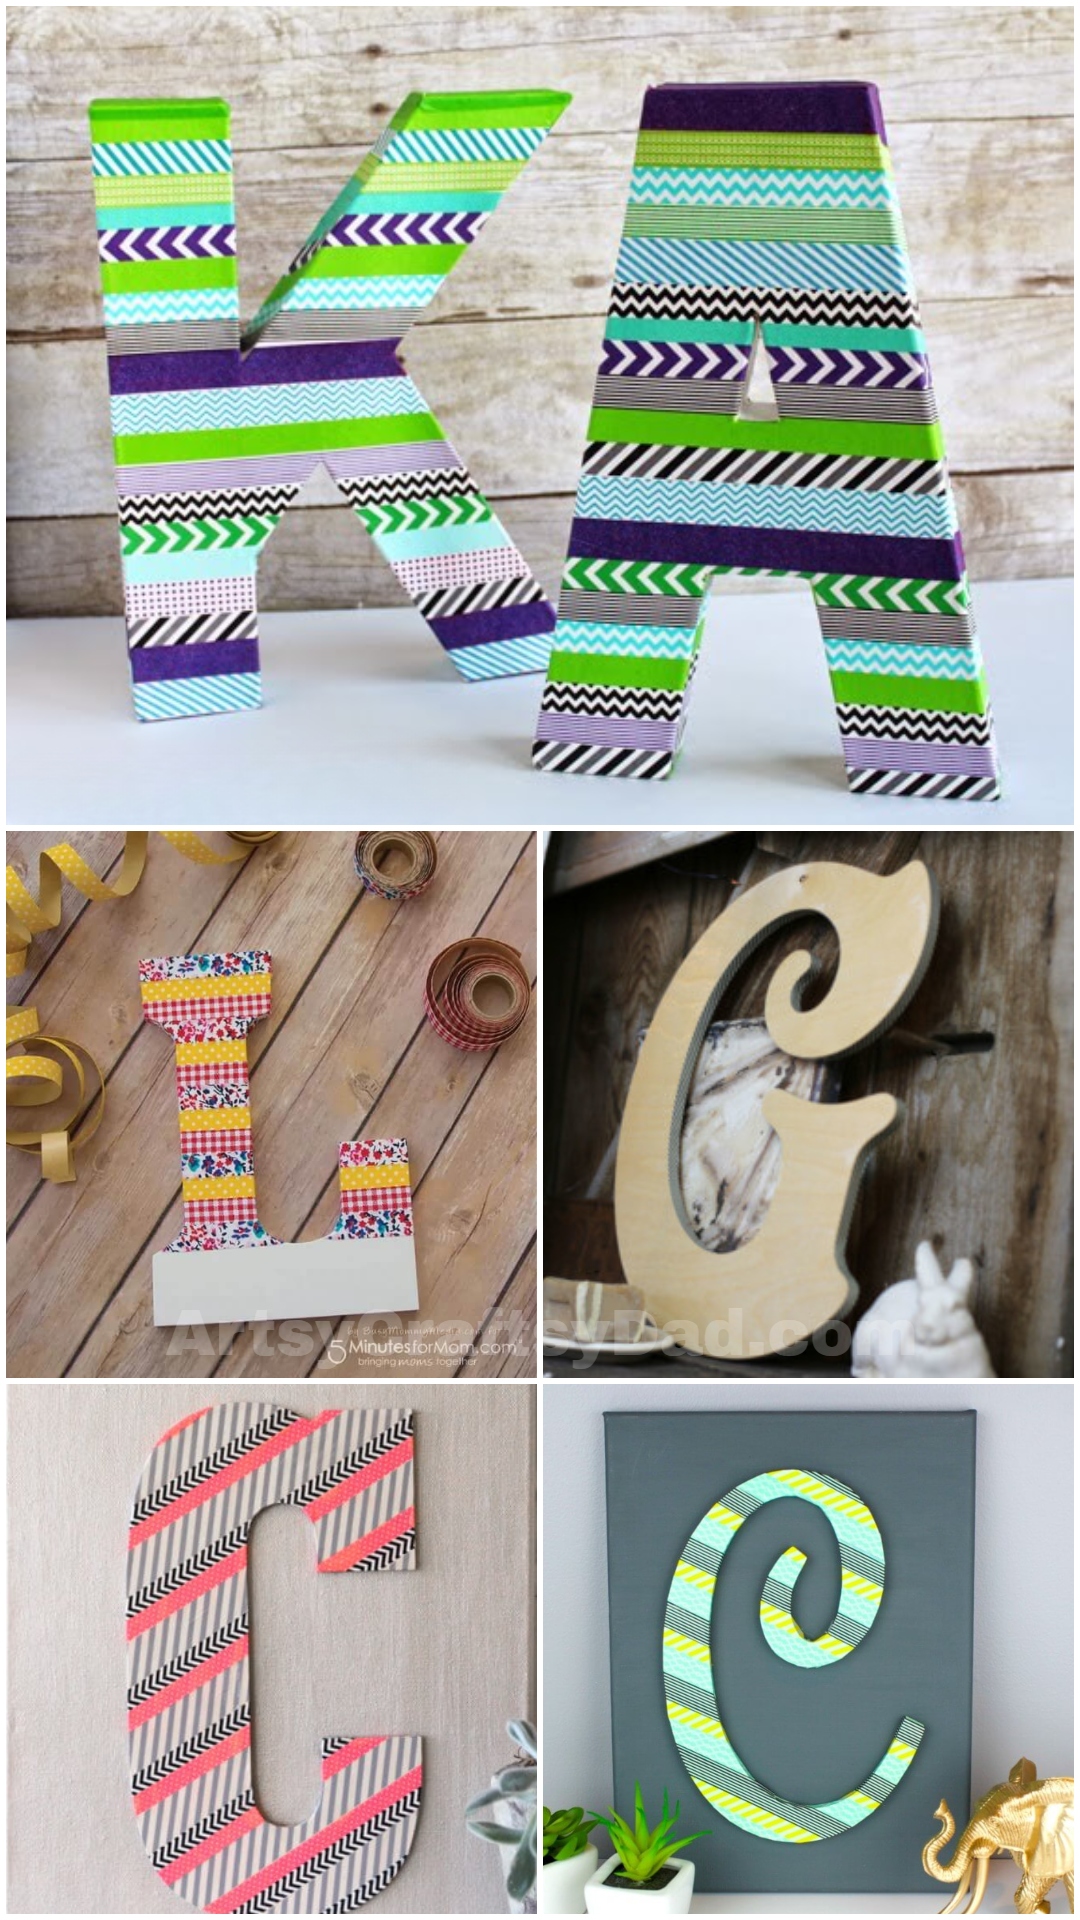 Decorative Washi Tape Letter Ideas for Kids